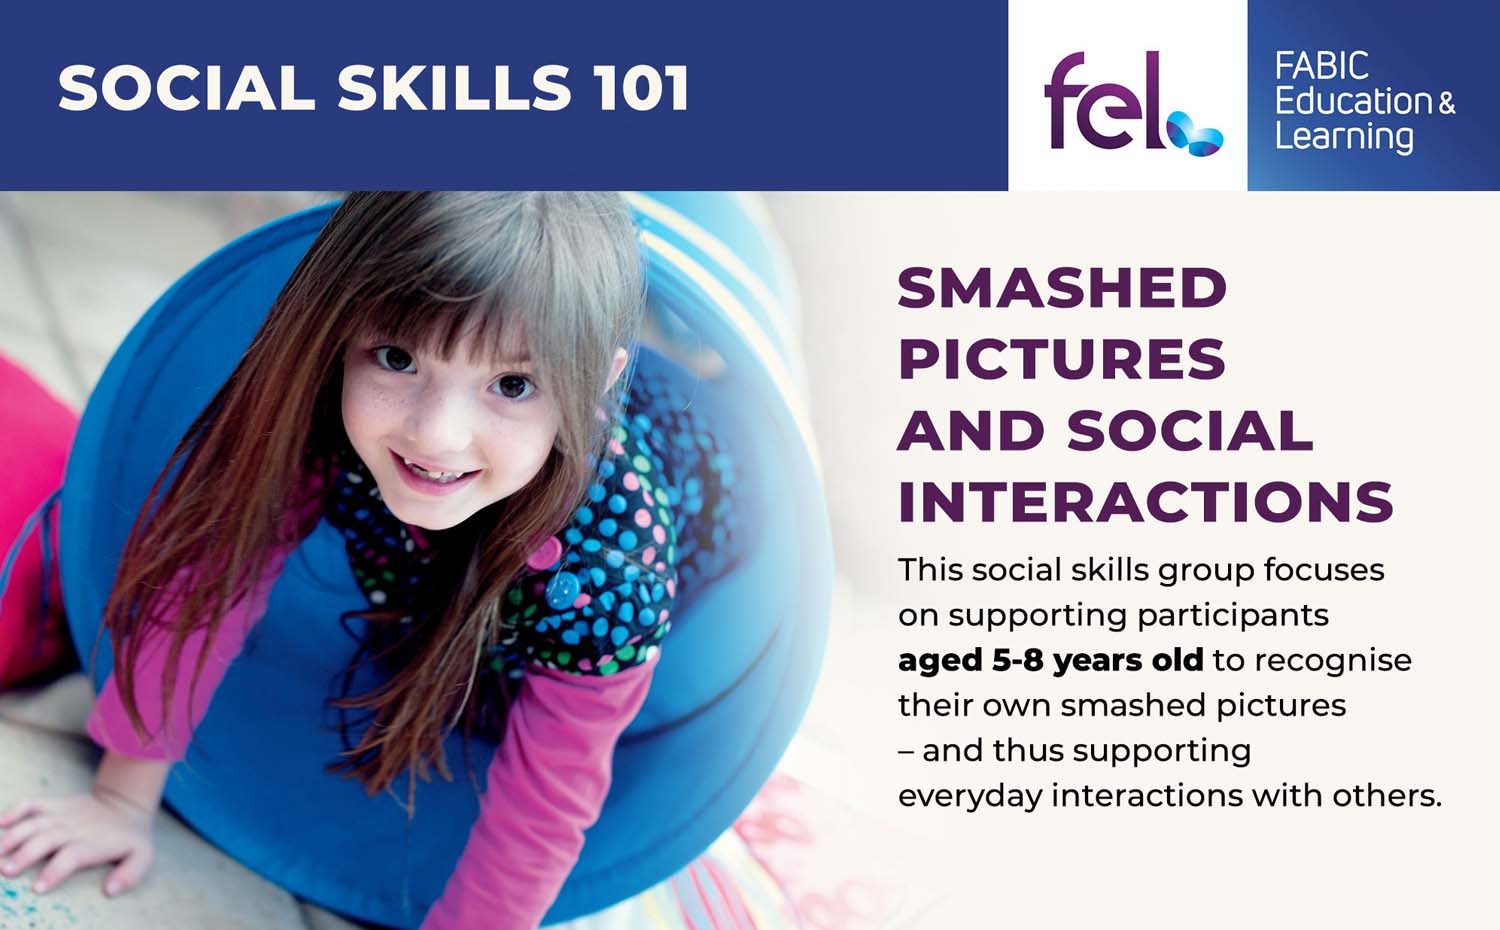 FEL SOCIAL SKILLS SMASHED PICTURES 5 8 years old